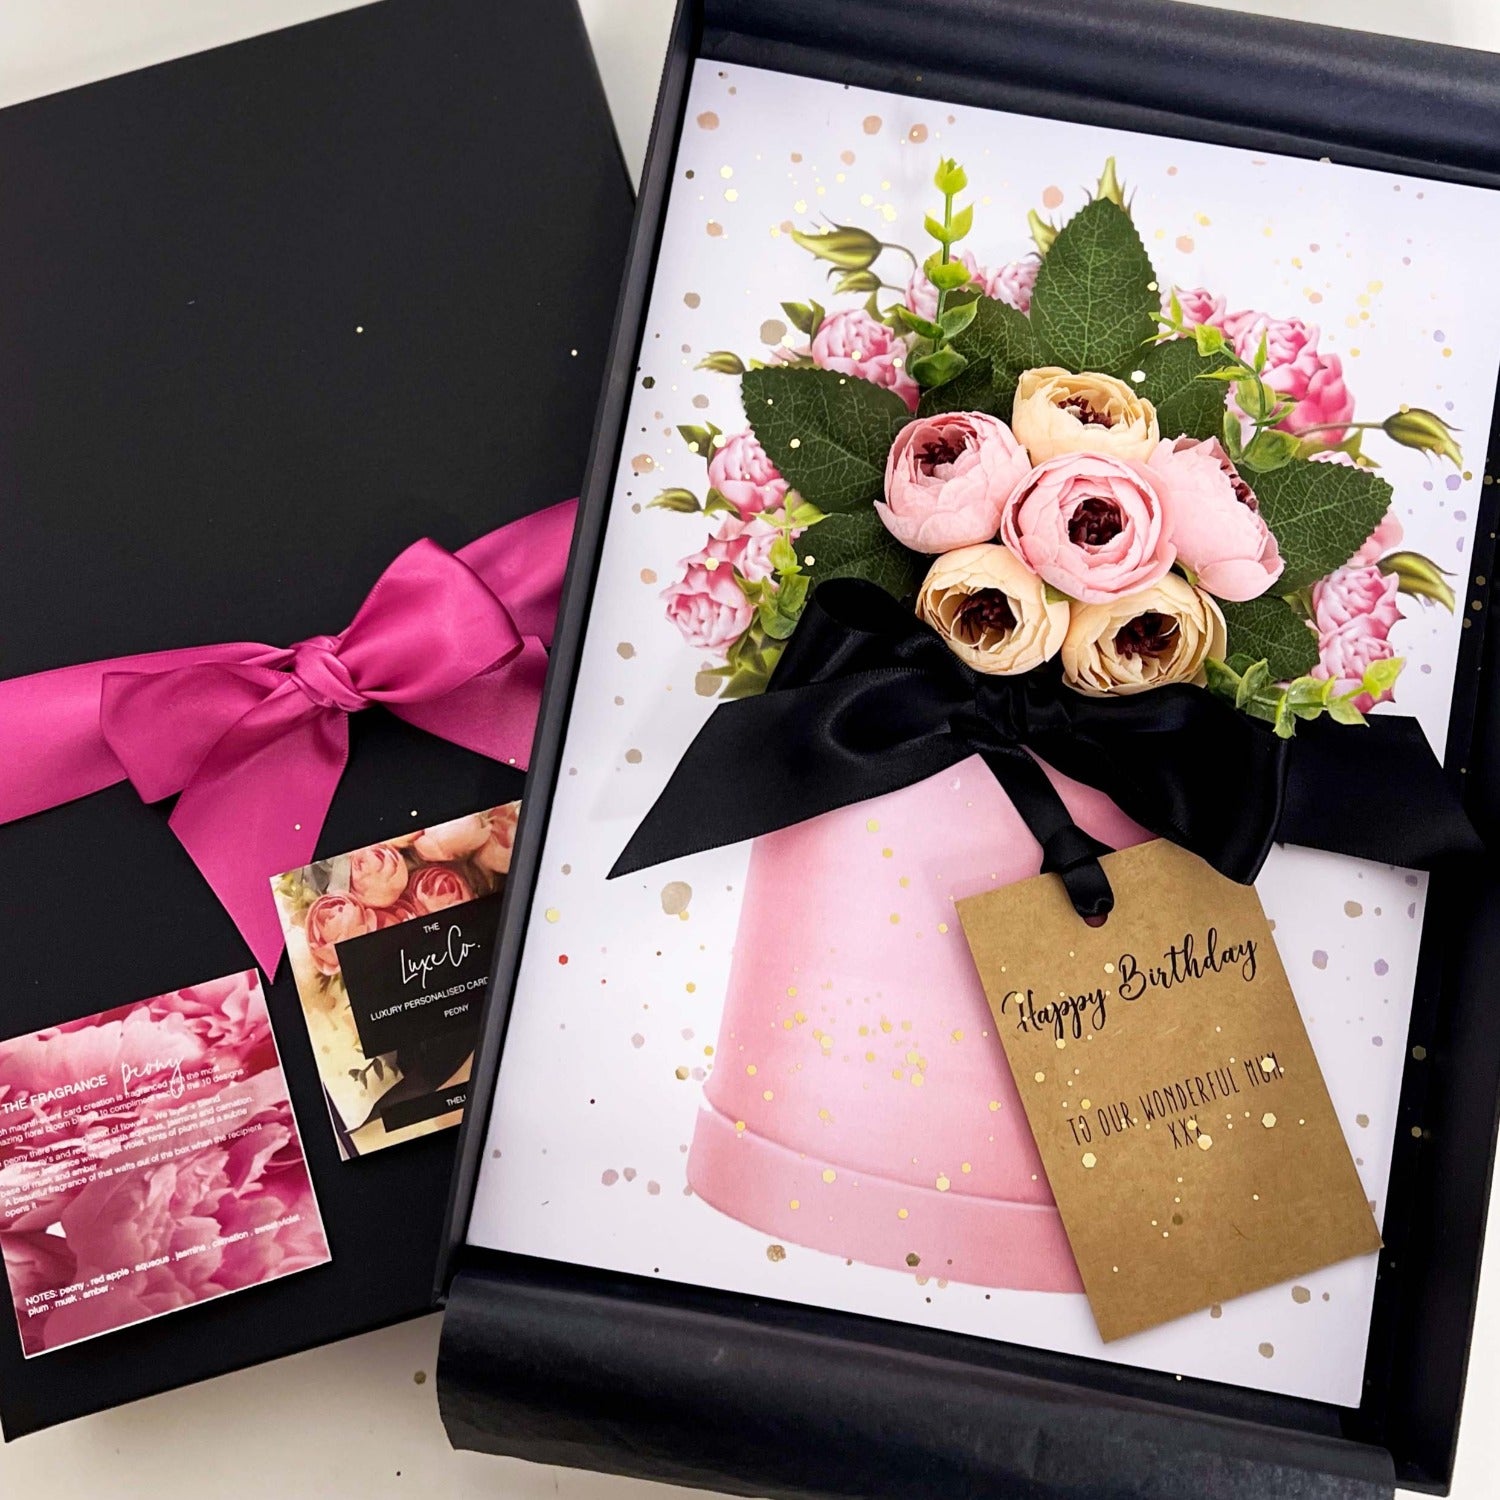 Bloom Peony Scented Card in black box with pink ribbon